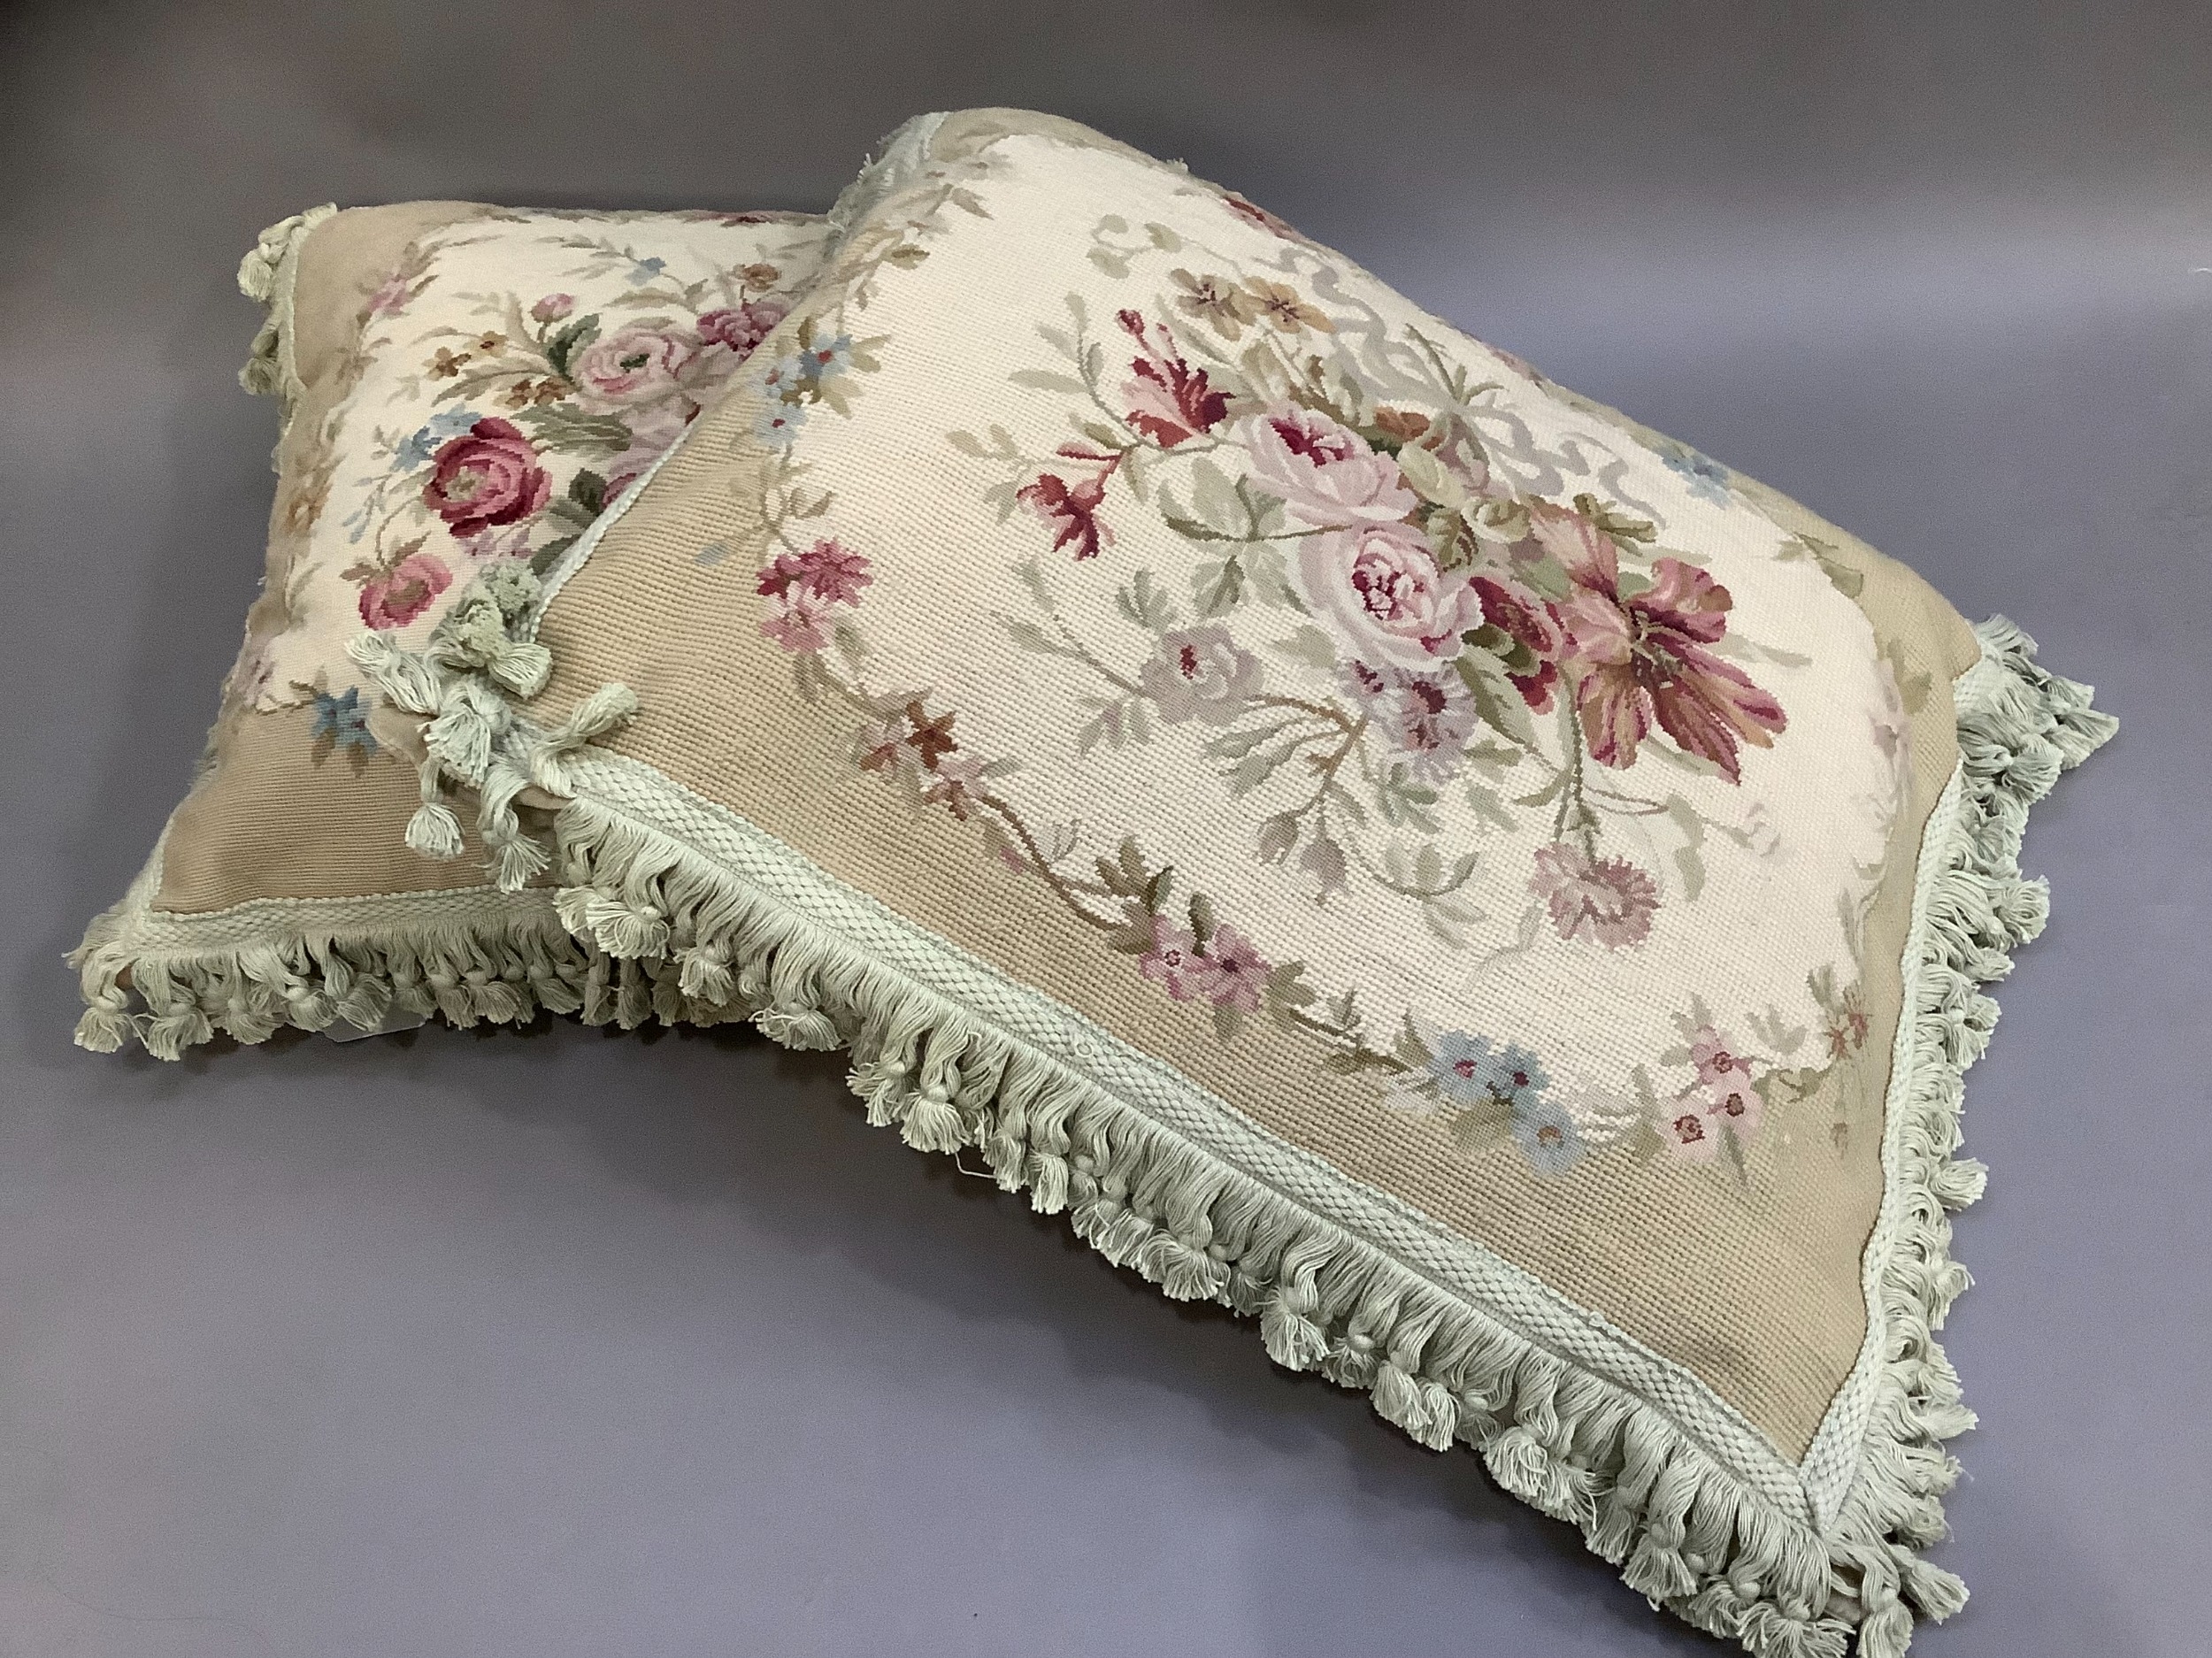 Two Chelsea Textile petit and gros point cushions, ribbon-tied summer flowers in shades of pink